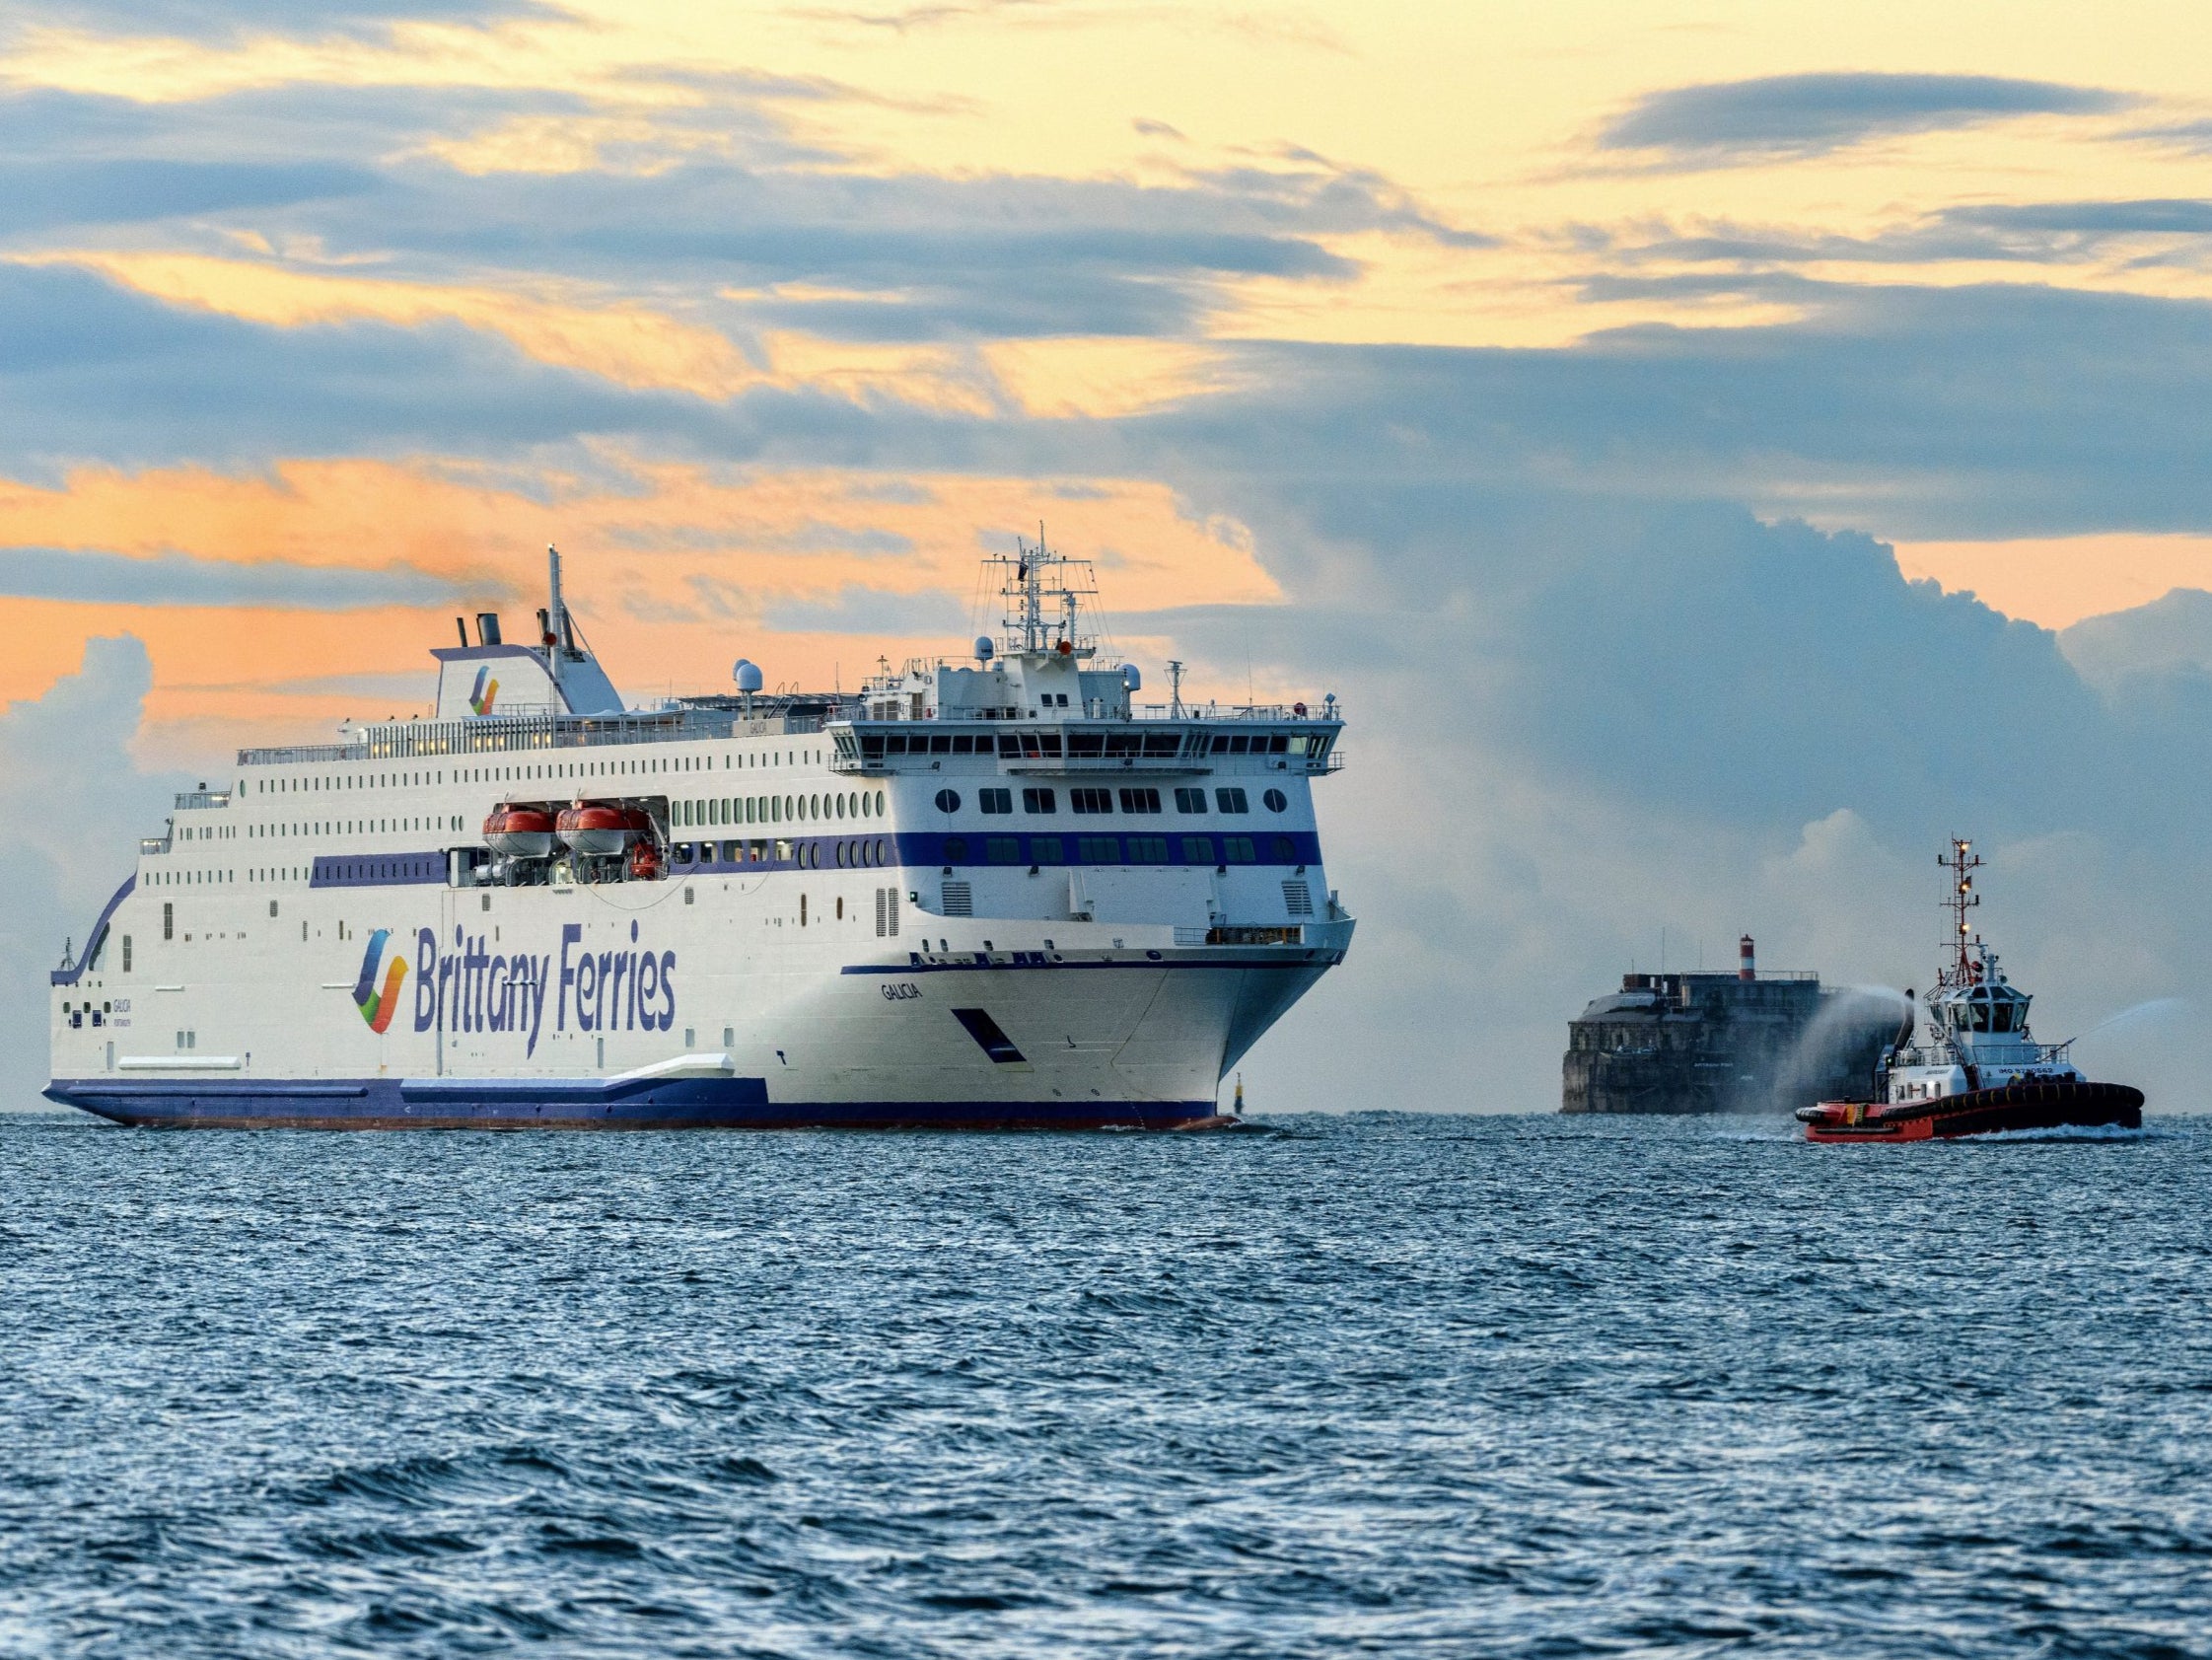 Brittany Ferries’ largest vessel, ‘Galicia’